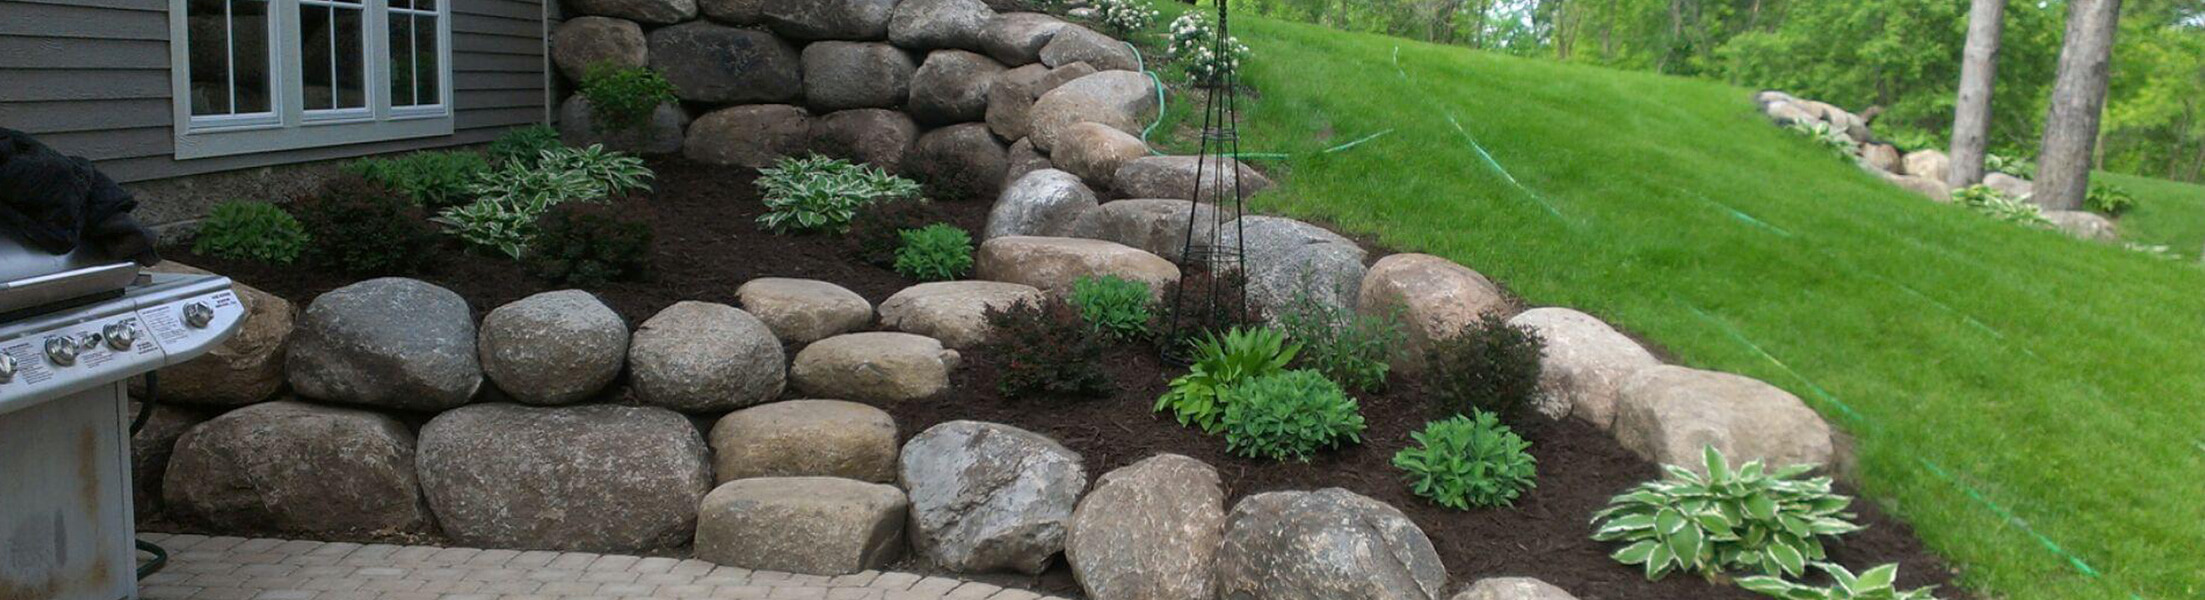 Fieldstone Boulder Retaining Wall and flower planter running along the side and back of a residential home